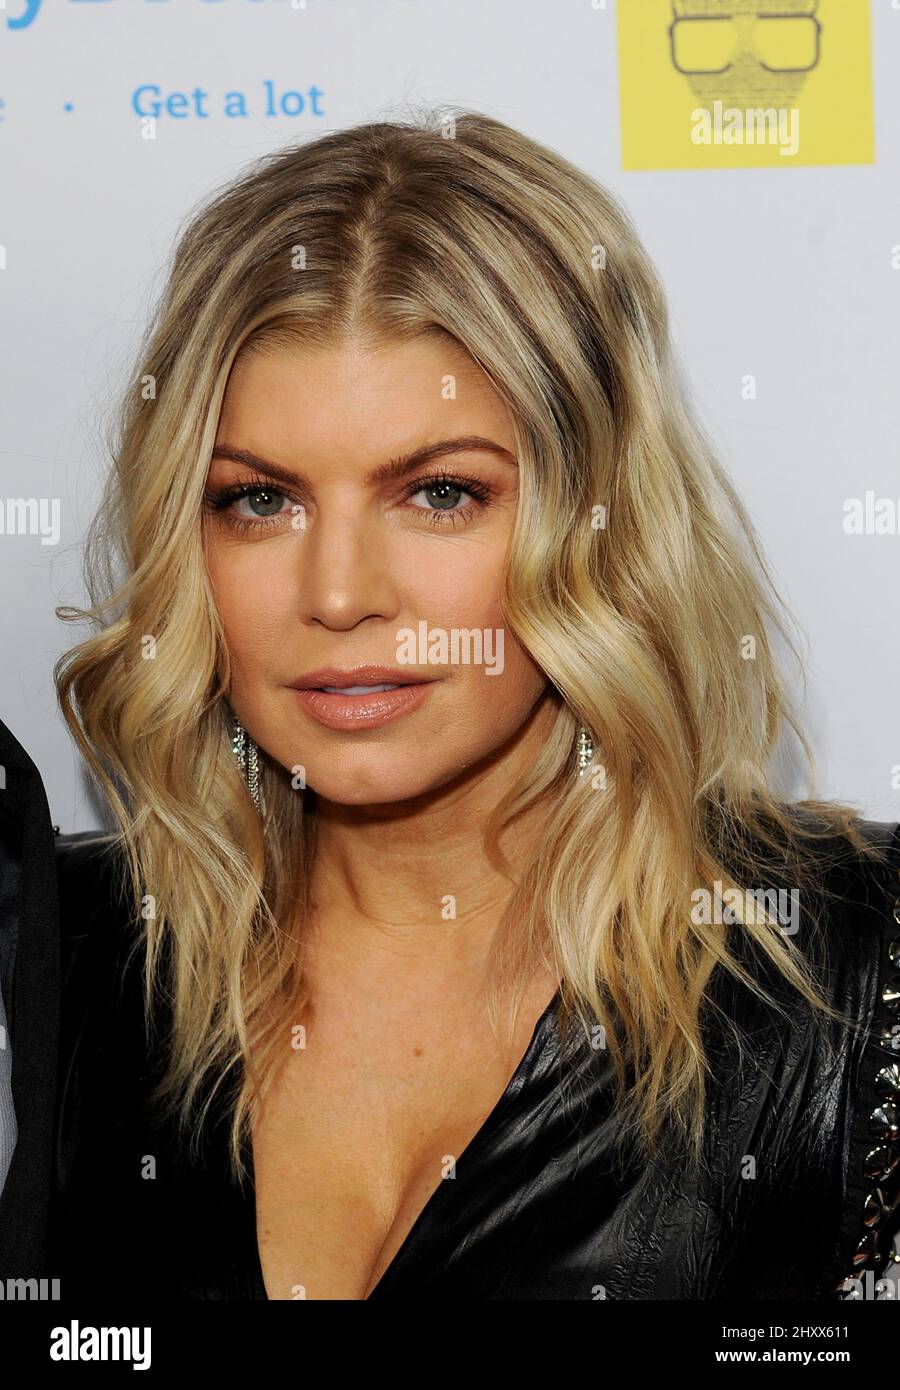 Fergie attending the Apl.de.ap Birthday celebration held at the Congo Room in Los Angeles, USA. Stock Photo